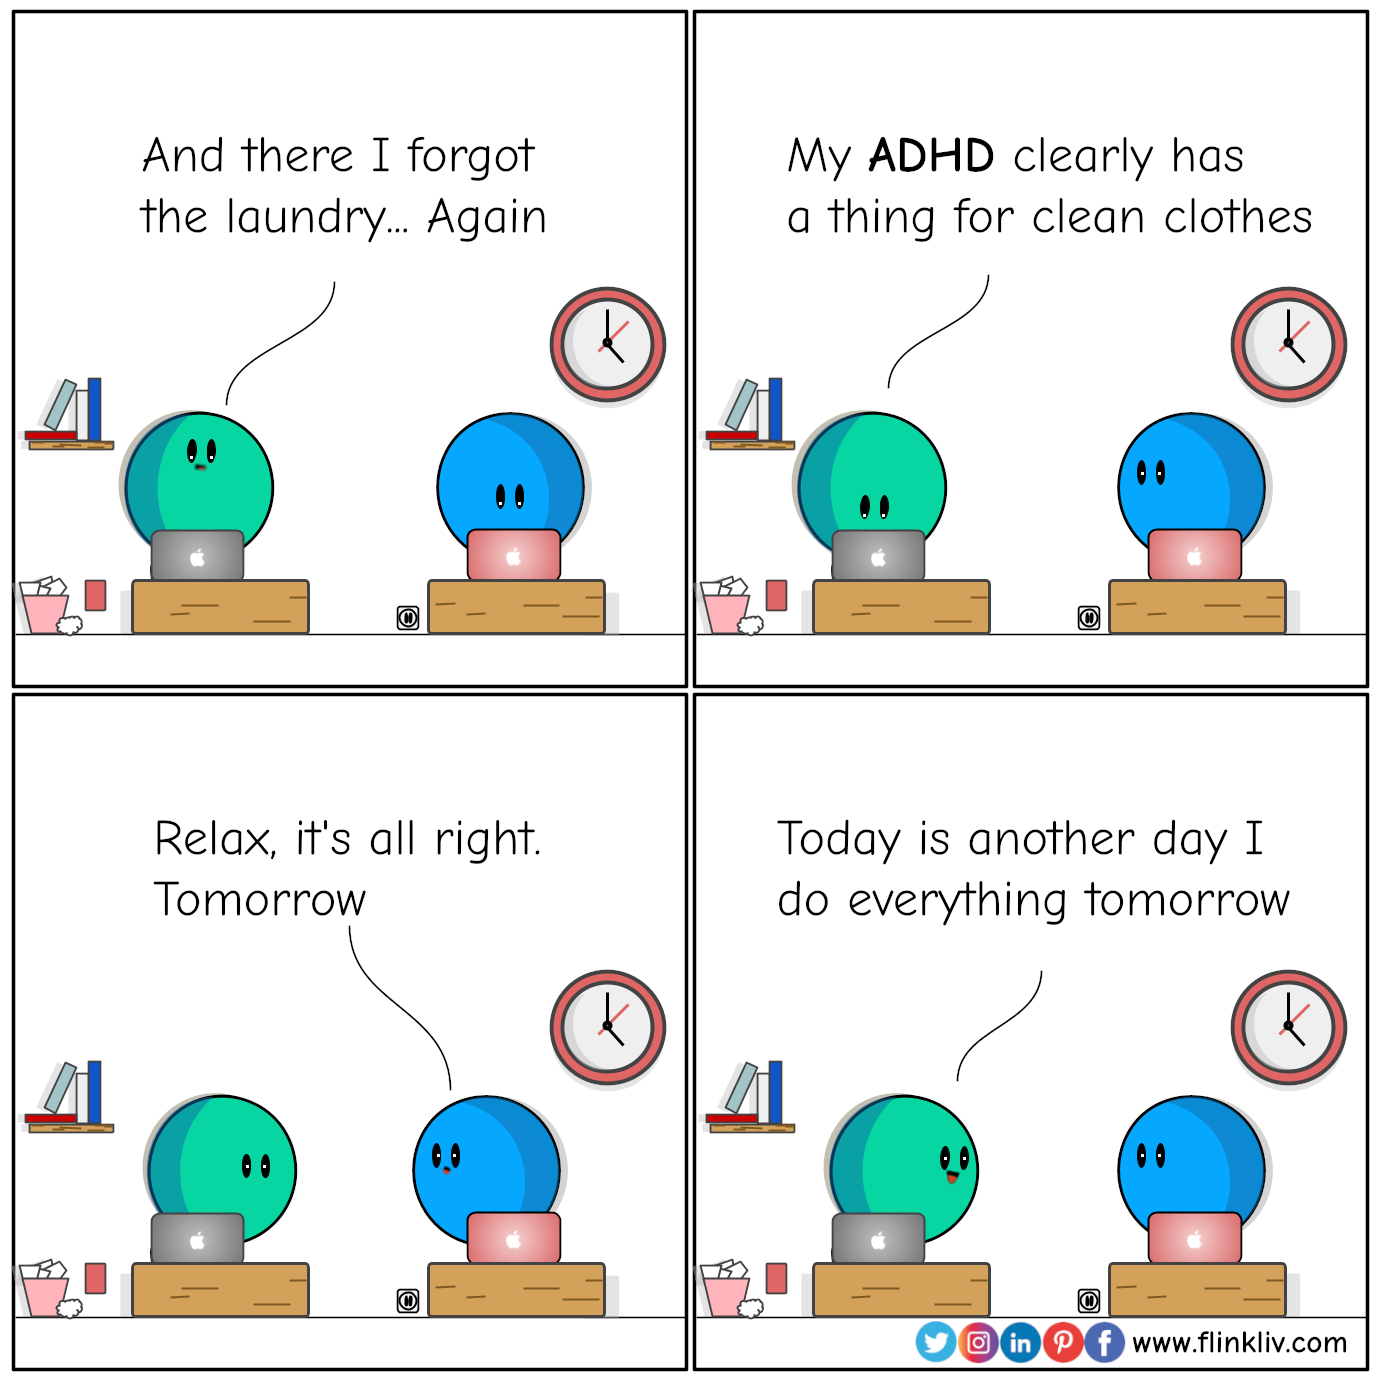 Conversation between A and B about ADHD and tasks.
                            A: And there I forgot the laundry... again
                            A: My ADHD clearly has a thing for clean clothes.
                            B: Relax, it's all right. Tomorrow
                            A: Today is another day I do everything tomorrow.
							By flinkliv.com 